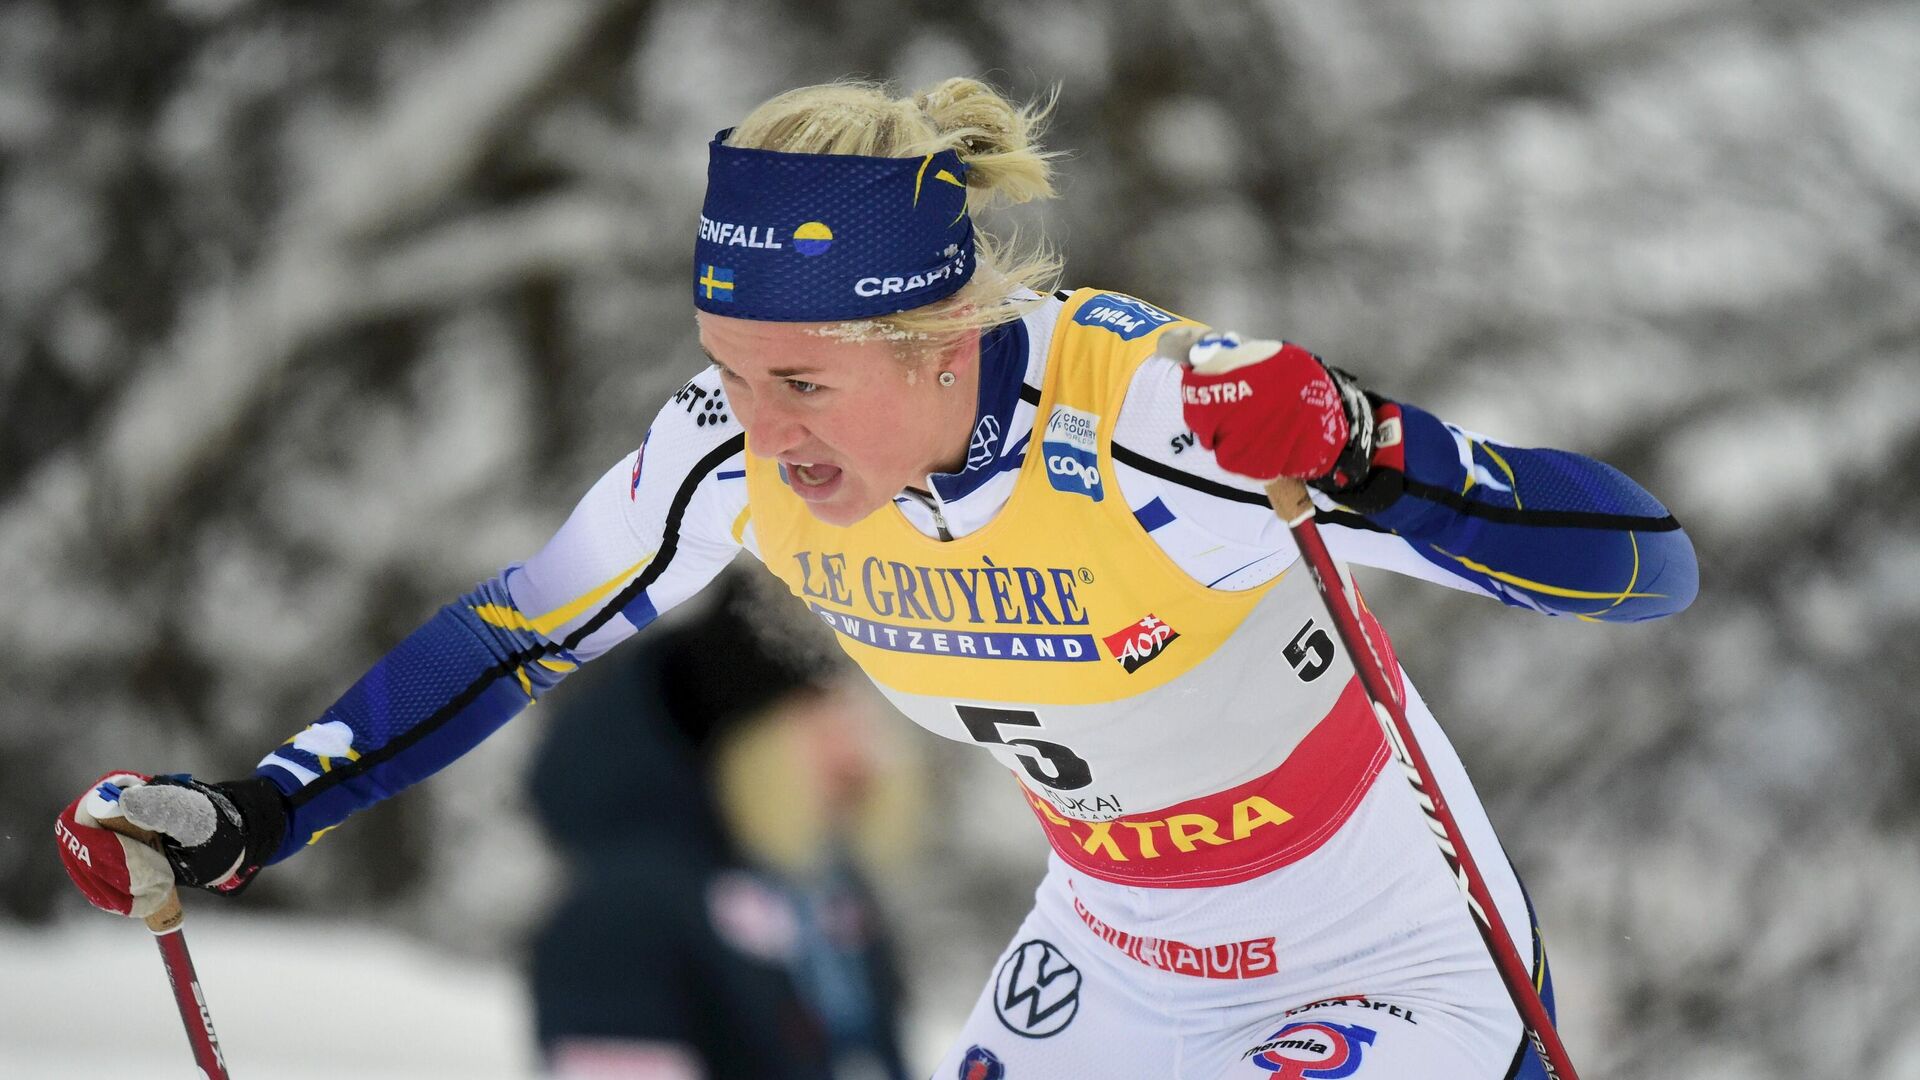 Maja Dahlqvist of Sweden competes in the women's cross country skiing freestyle 10 km pursuit competition at the FIS World Cup Ruka Nordic event in Kuusamo, Finland, on November 29, 2020. (Photo by Vesa Moilanen / Lehtikuva / AFP) / Finland OUT - РИА Новости, 1920, 06.02.2021